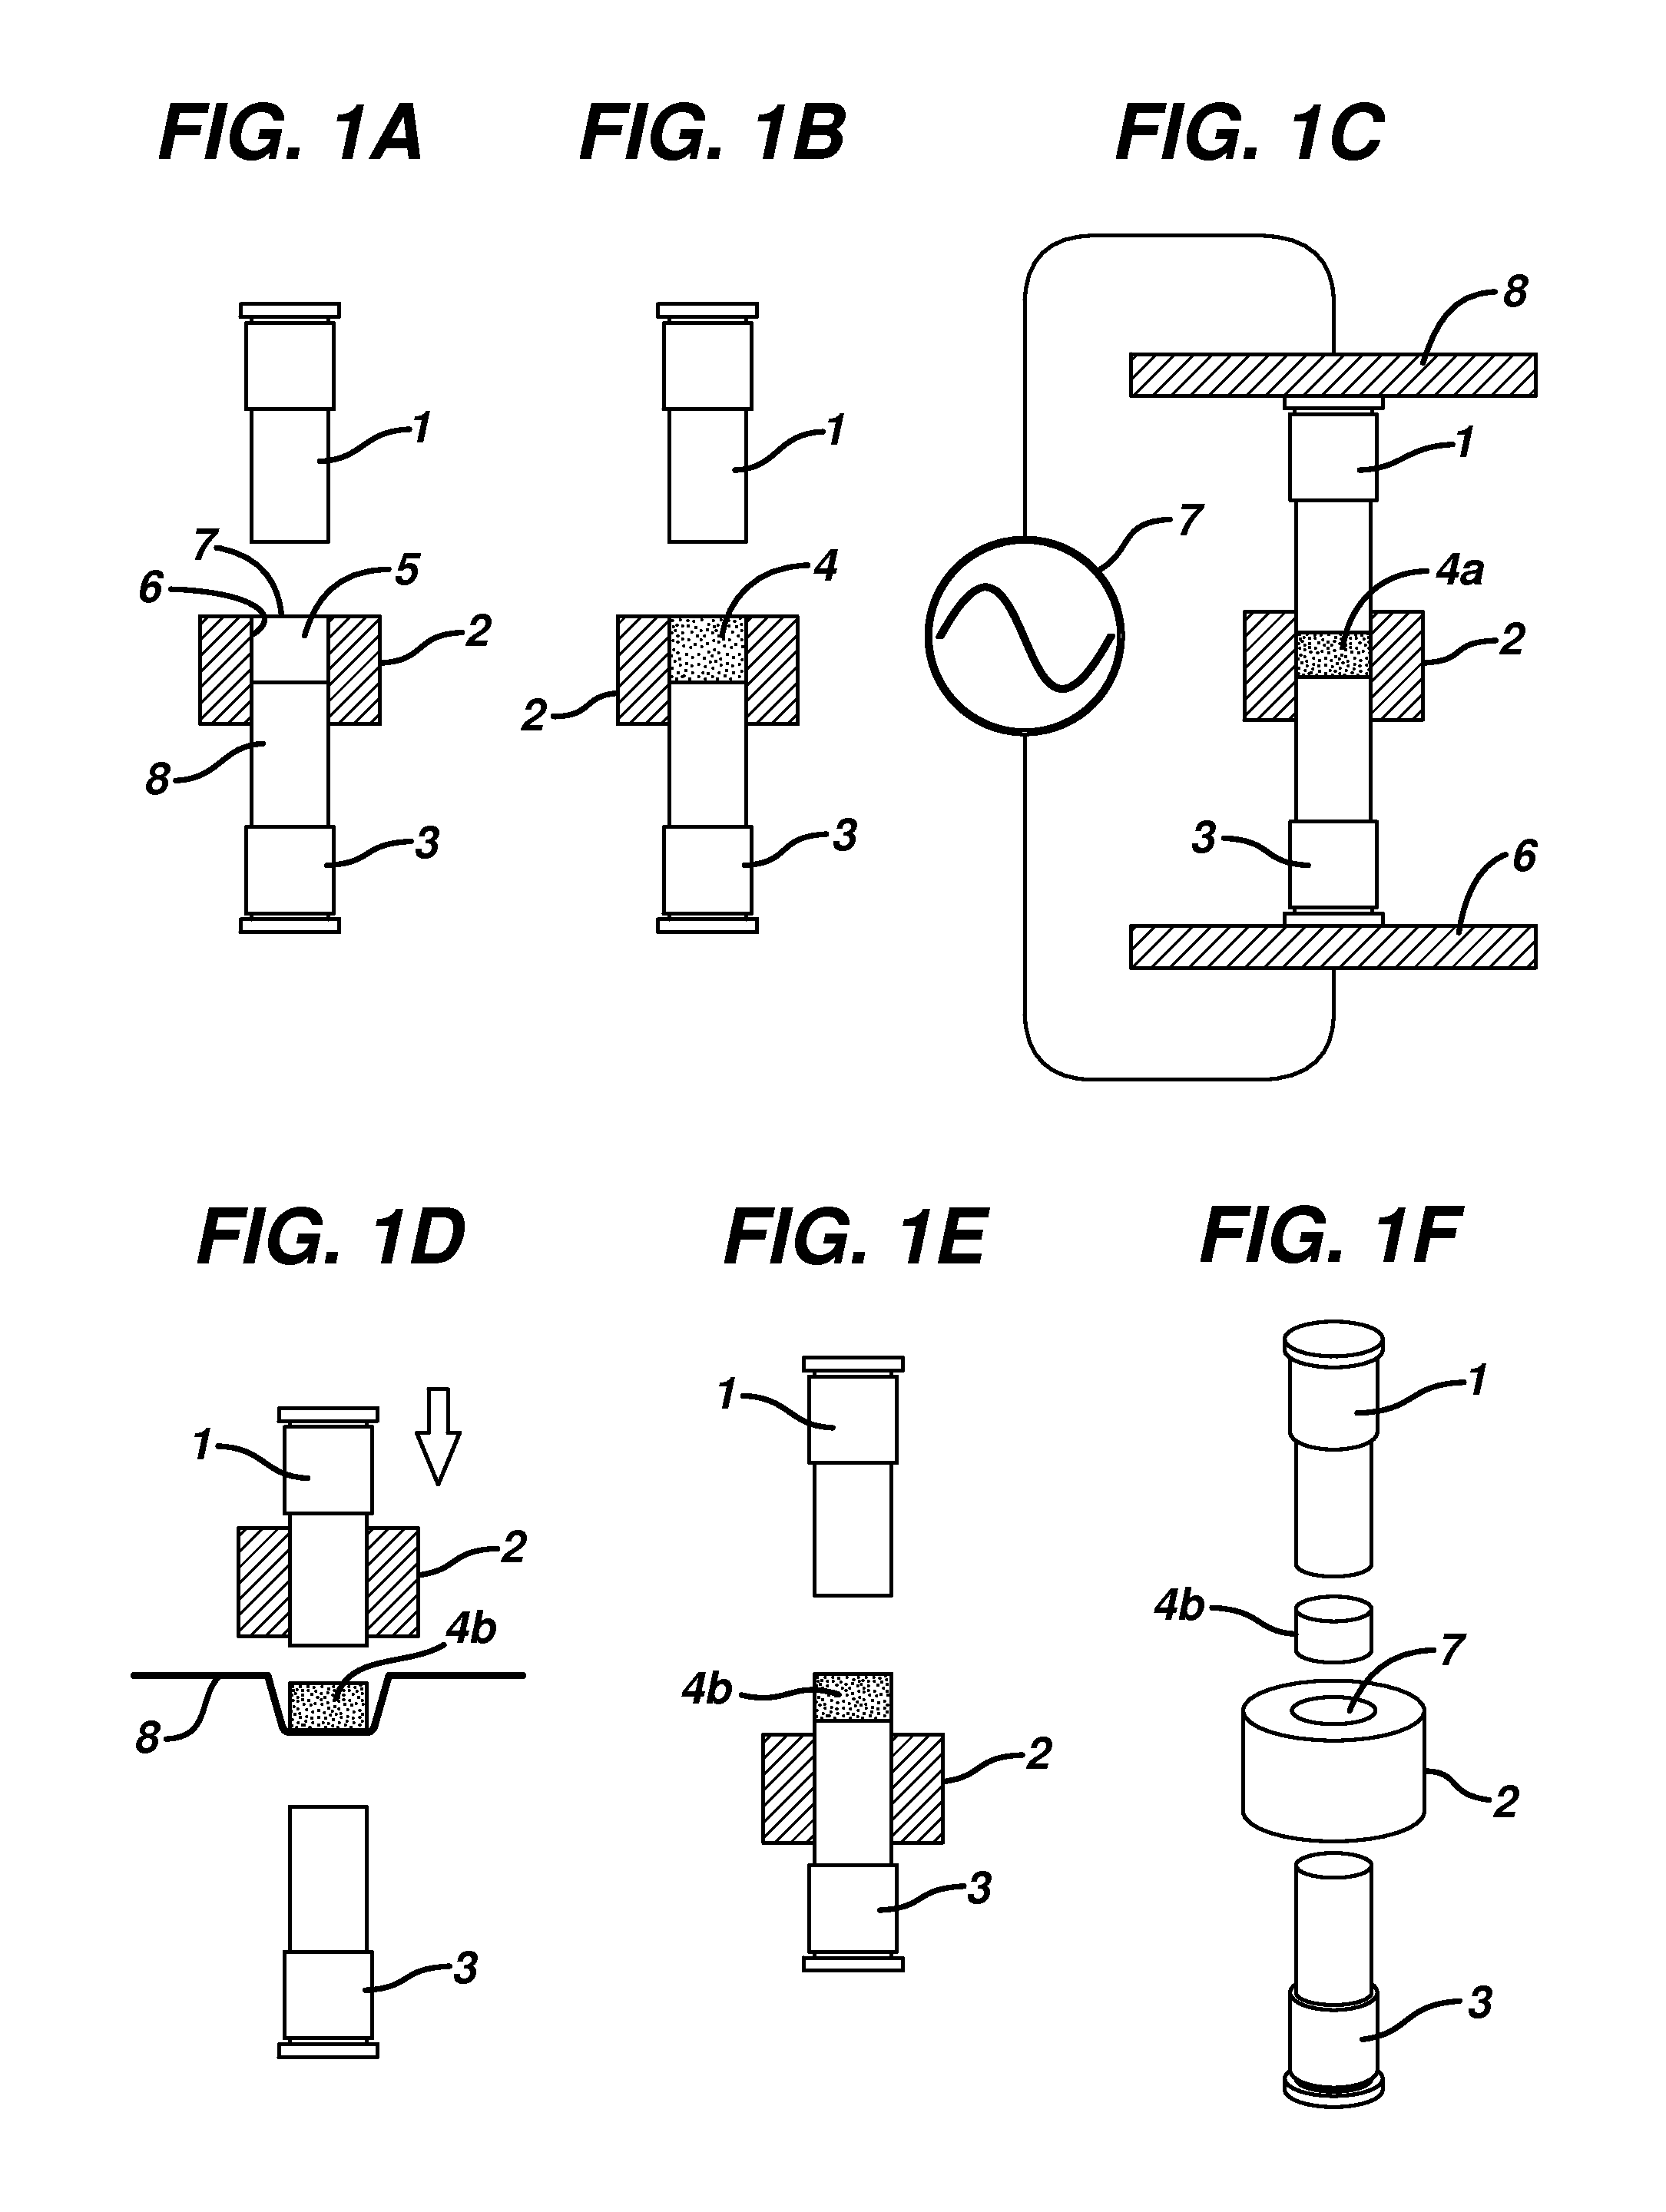 Machine for the manufacture of dosage forms utilizing radiofrequency energy